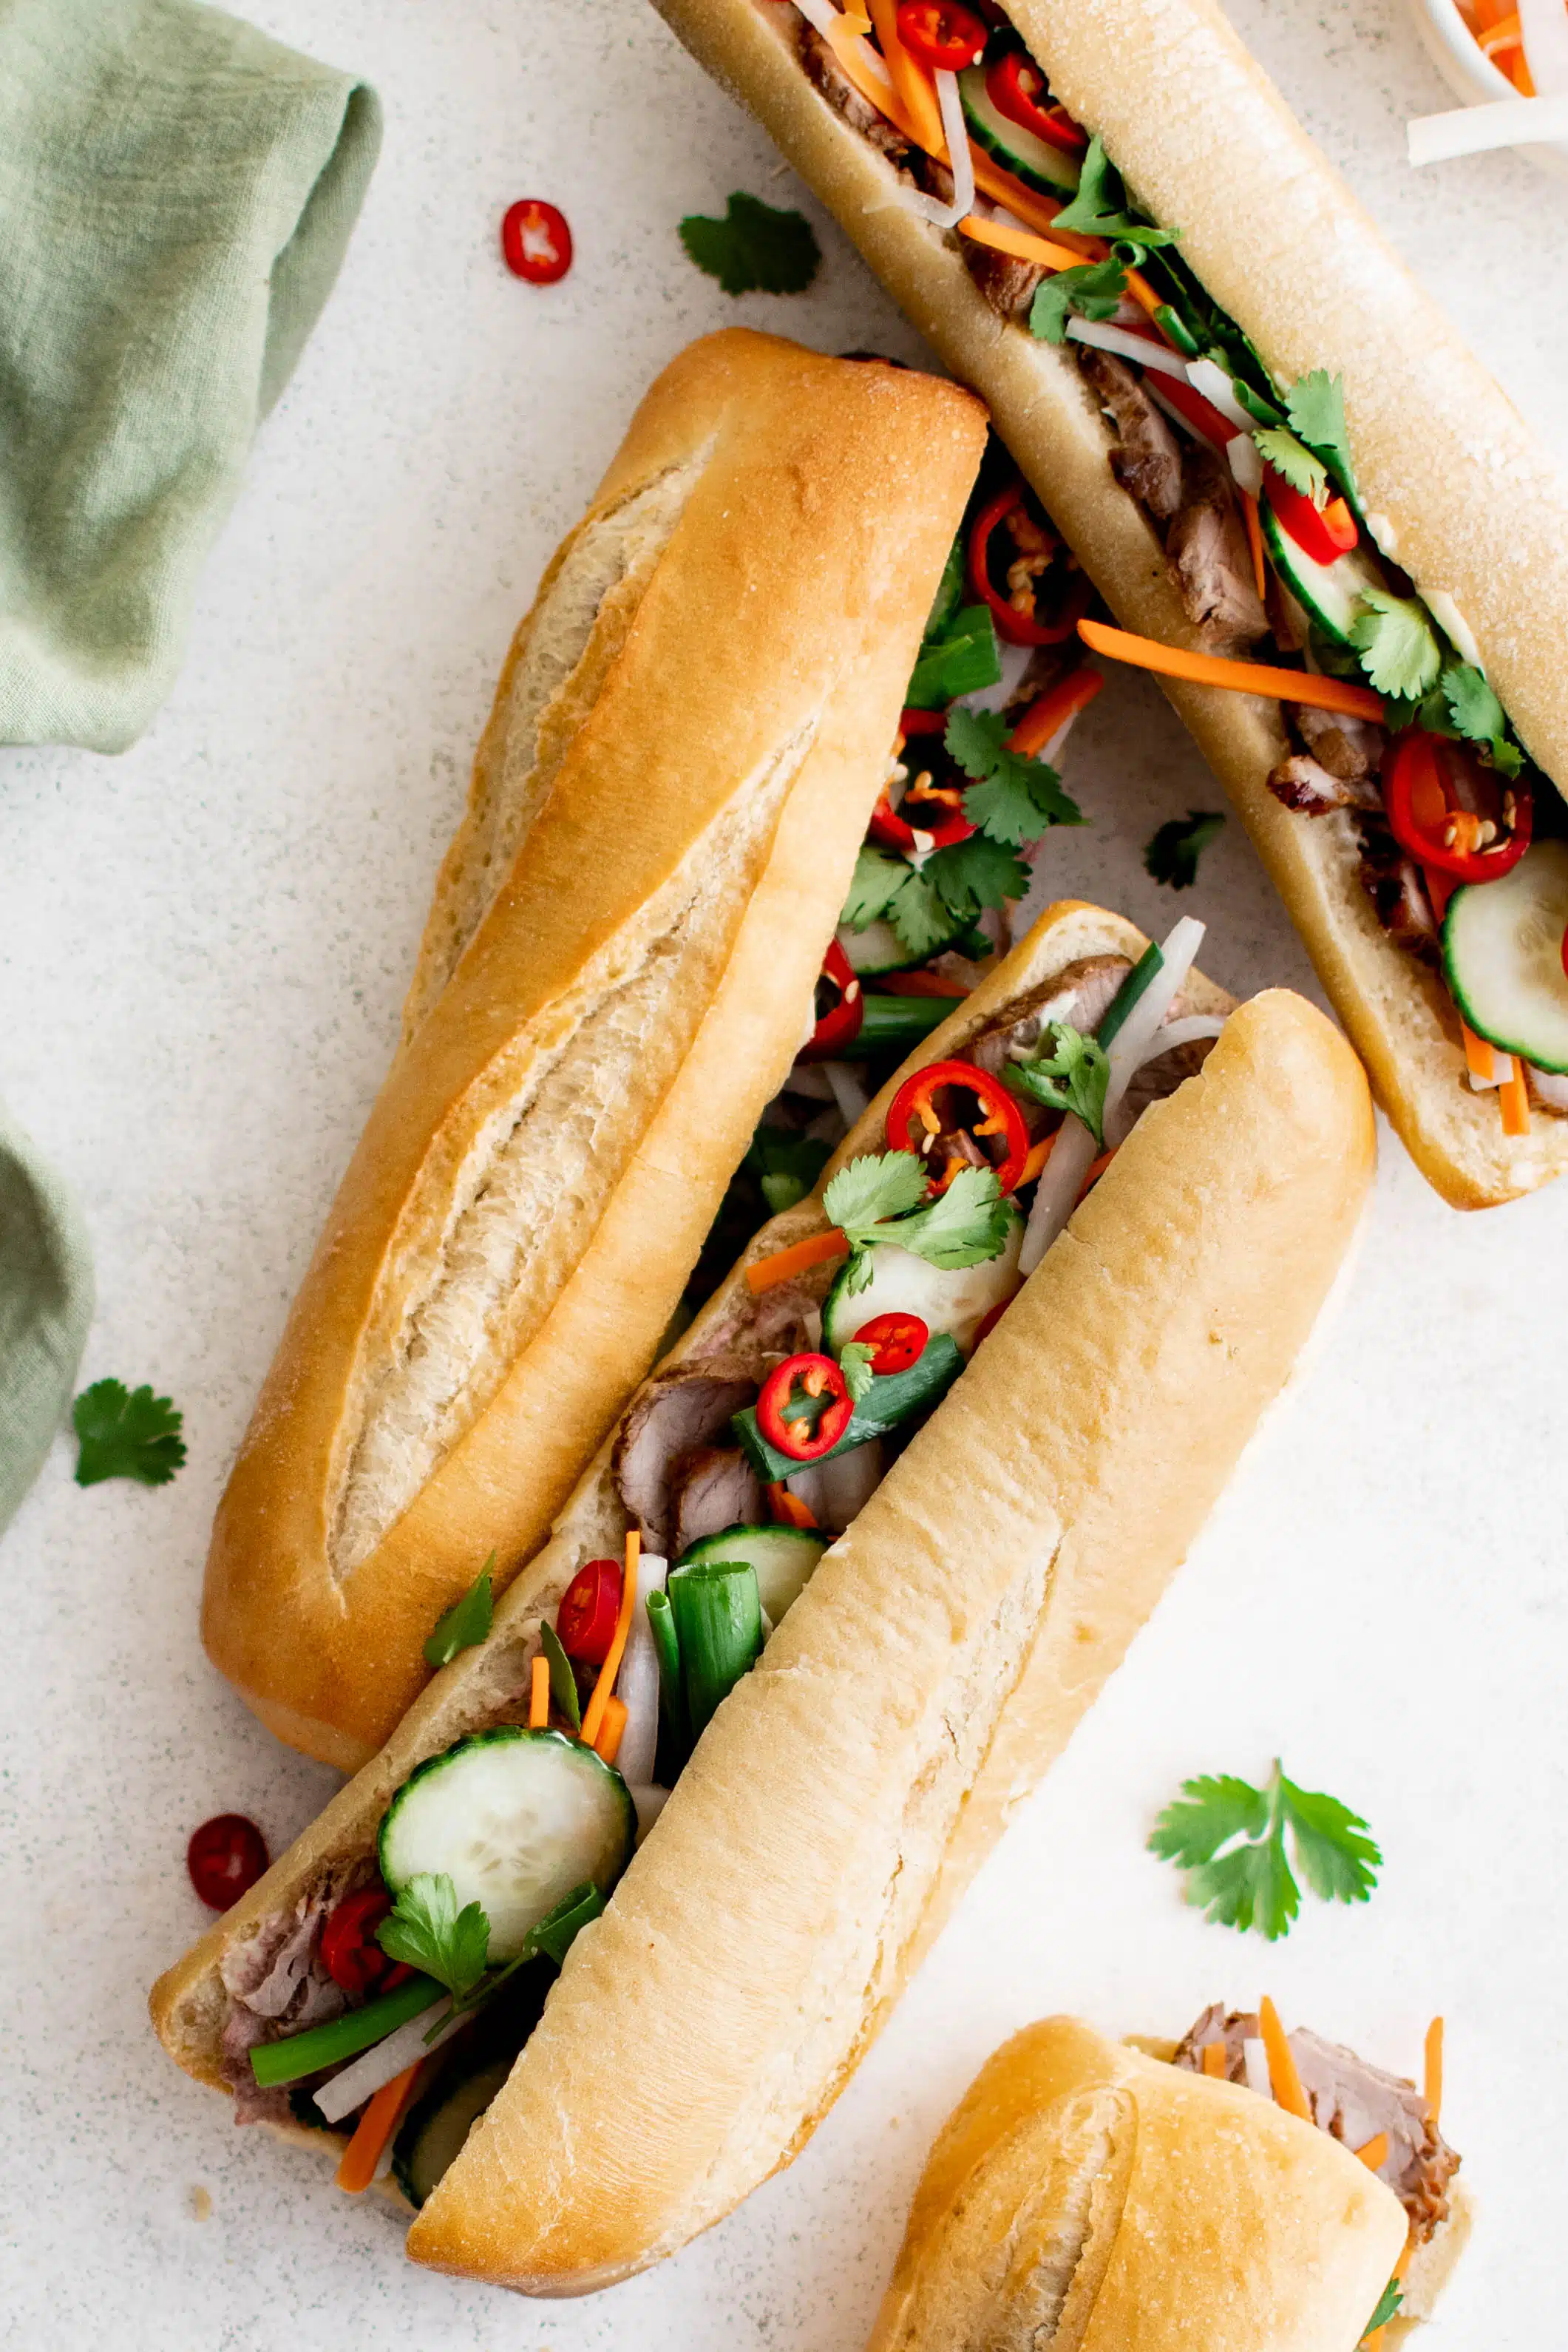 Three Bánh Mì sandwiches assembled and ready to serve.